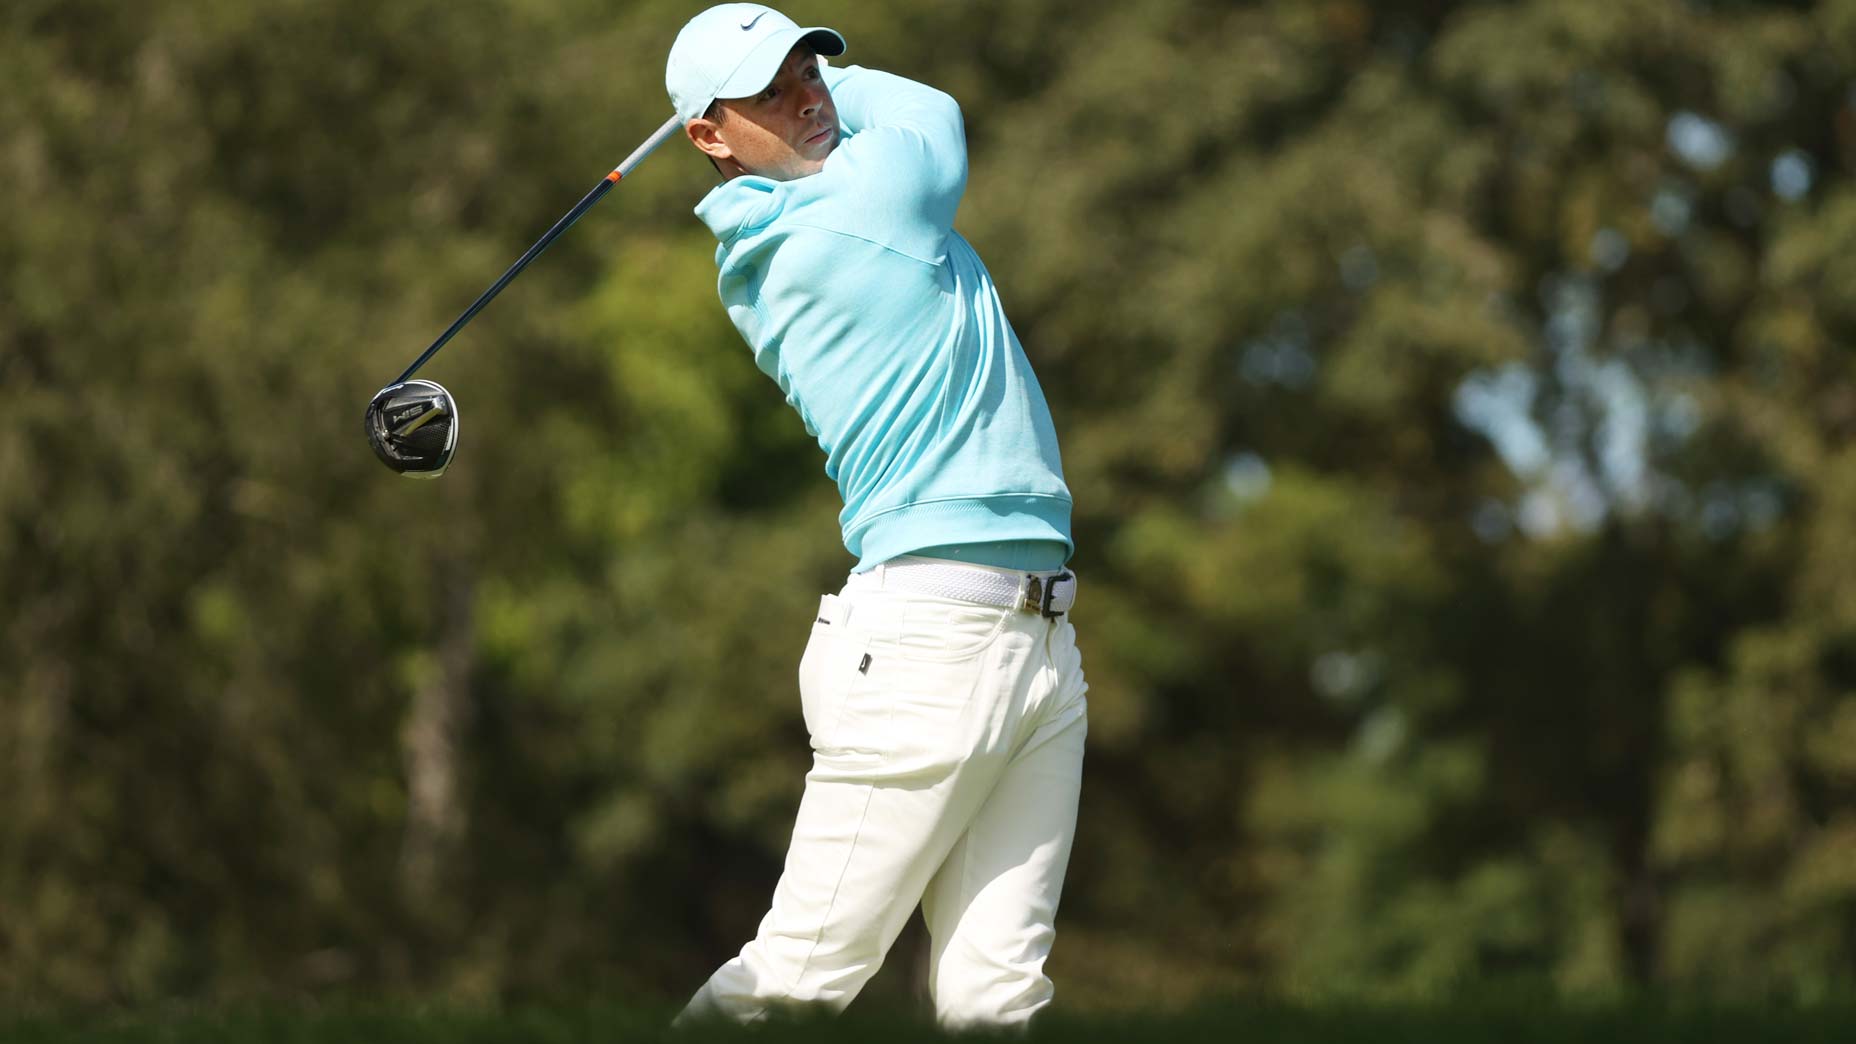 Is Rory McIlroy getting ready to join the distance arms race?